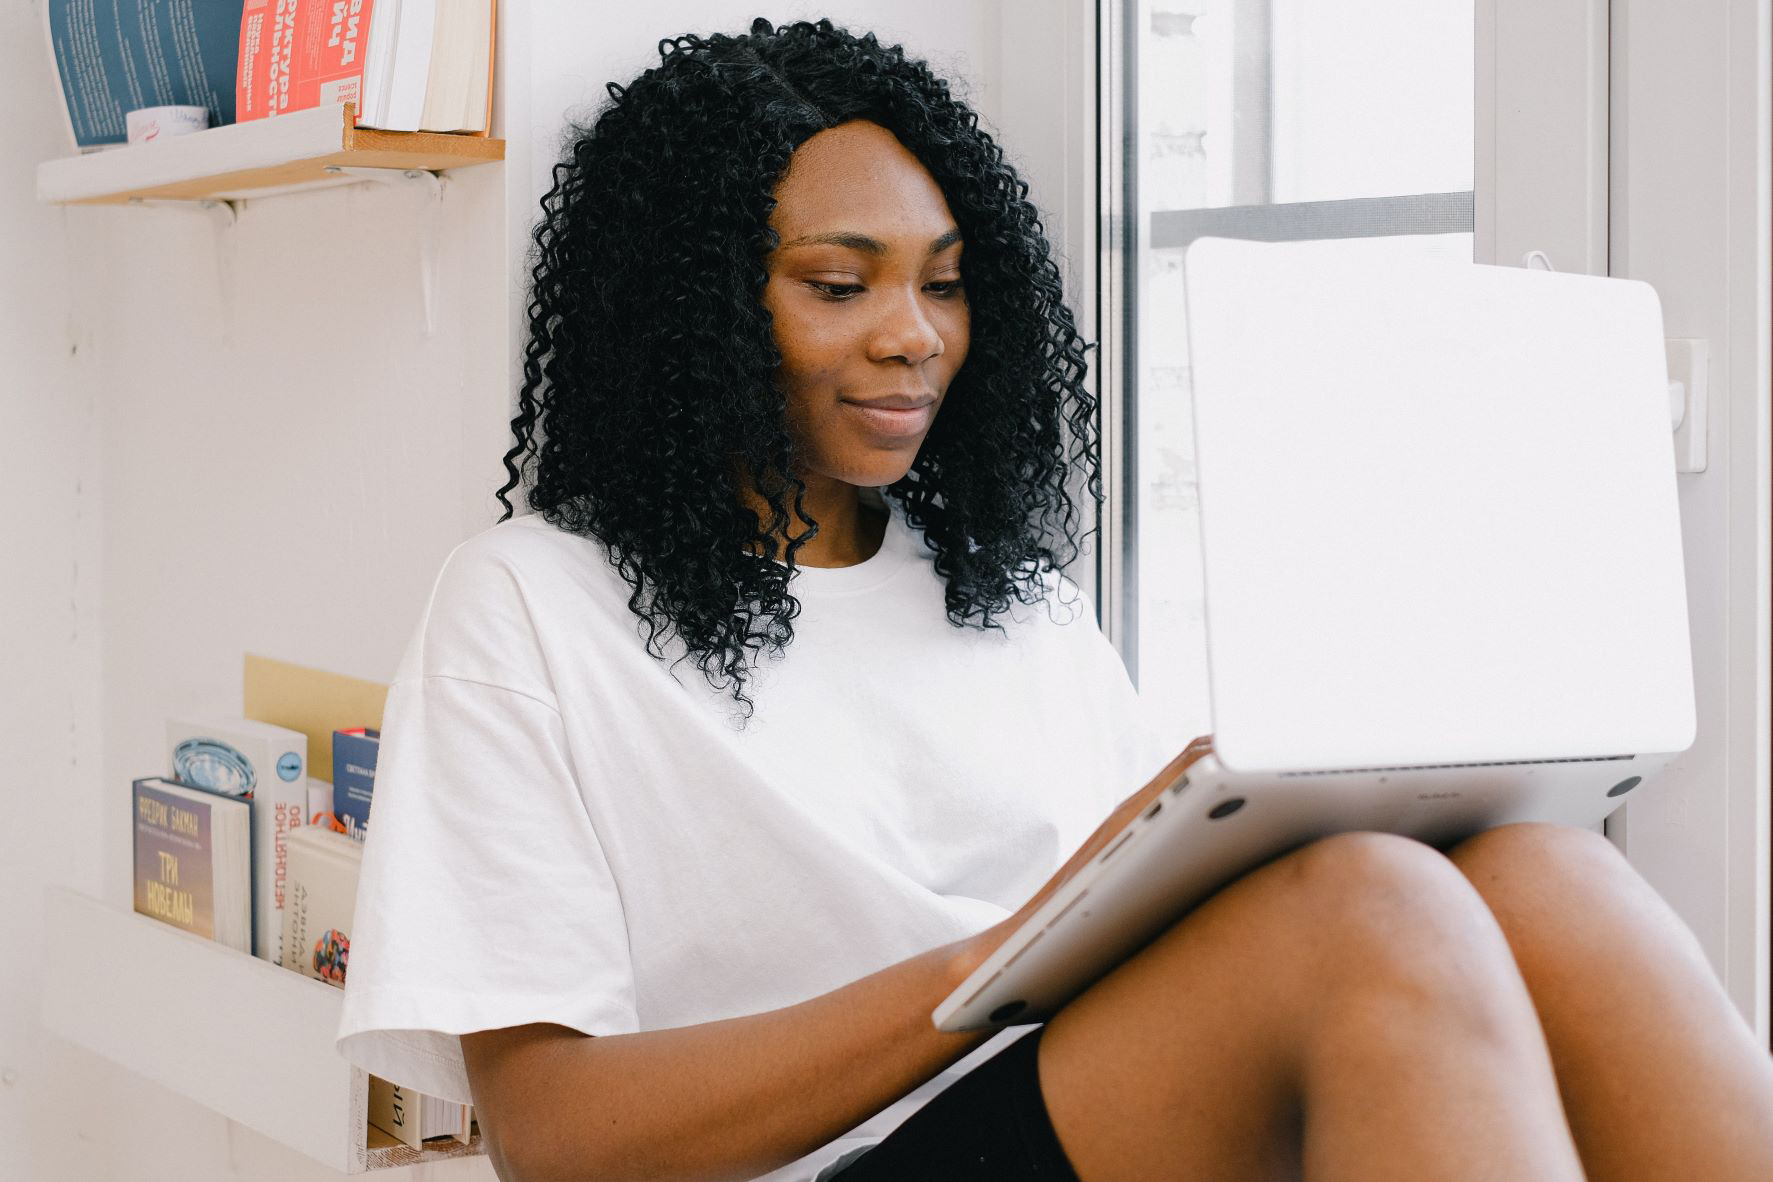  Why Hybrid, Remote & Flexible Work Appeals Even More to BIPOC Employees 